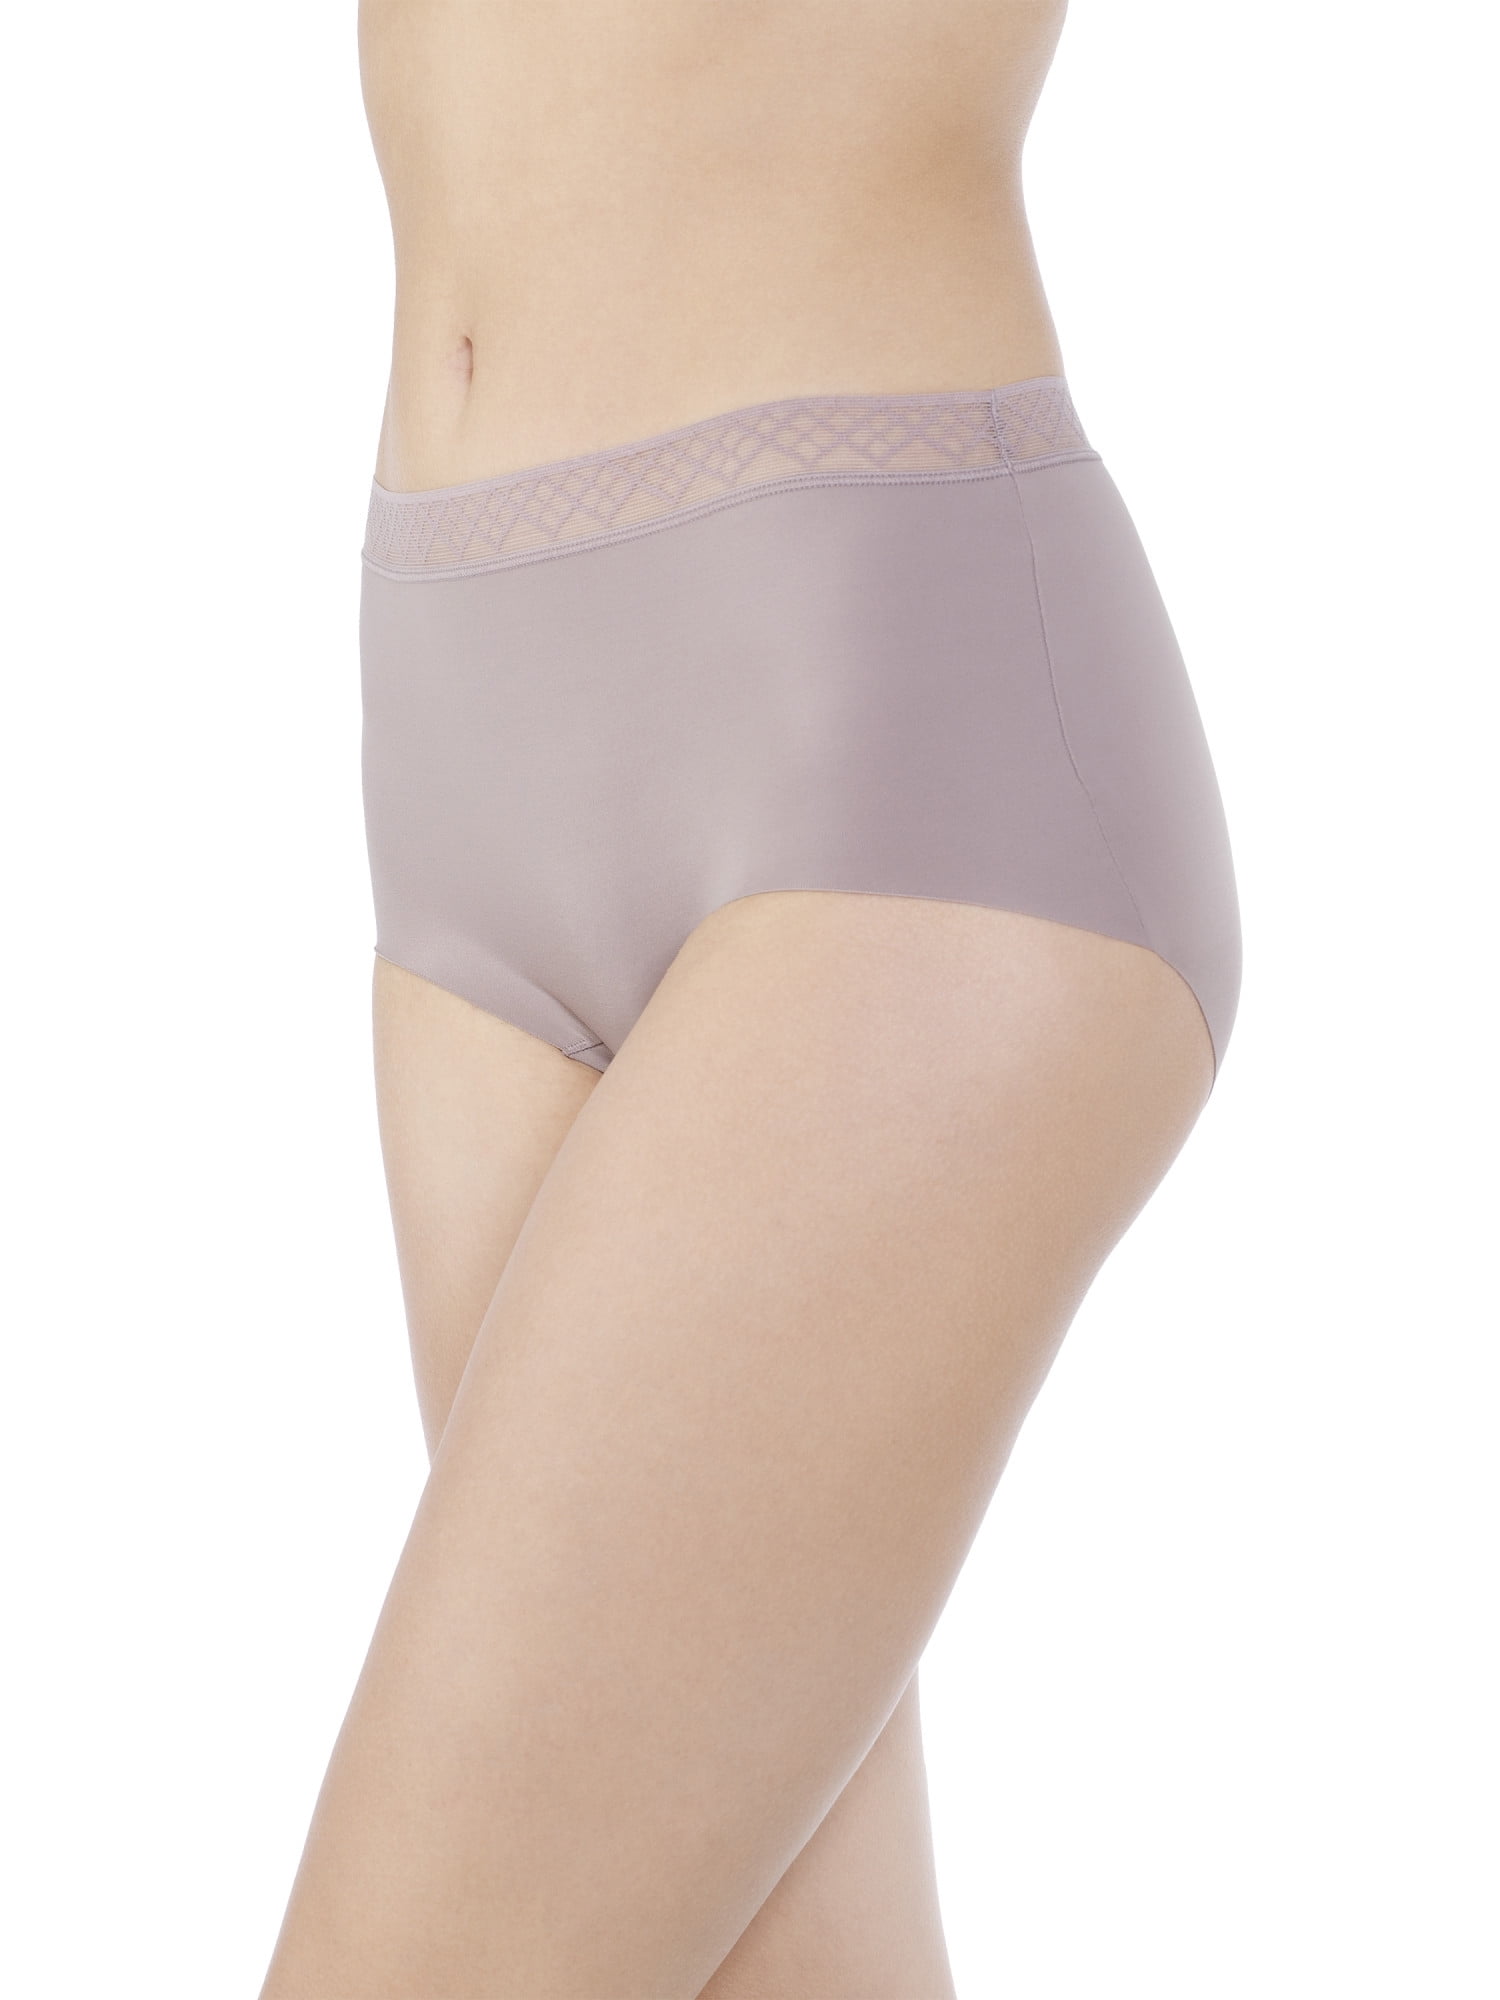 Women's Invisibly Smooth Brief Panty, Style 4813383